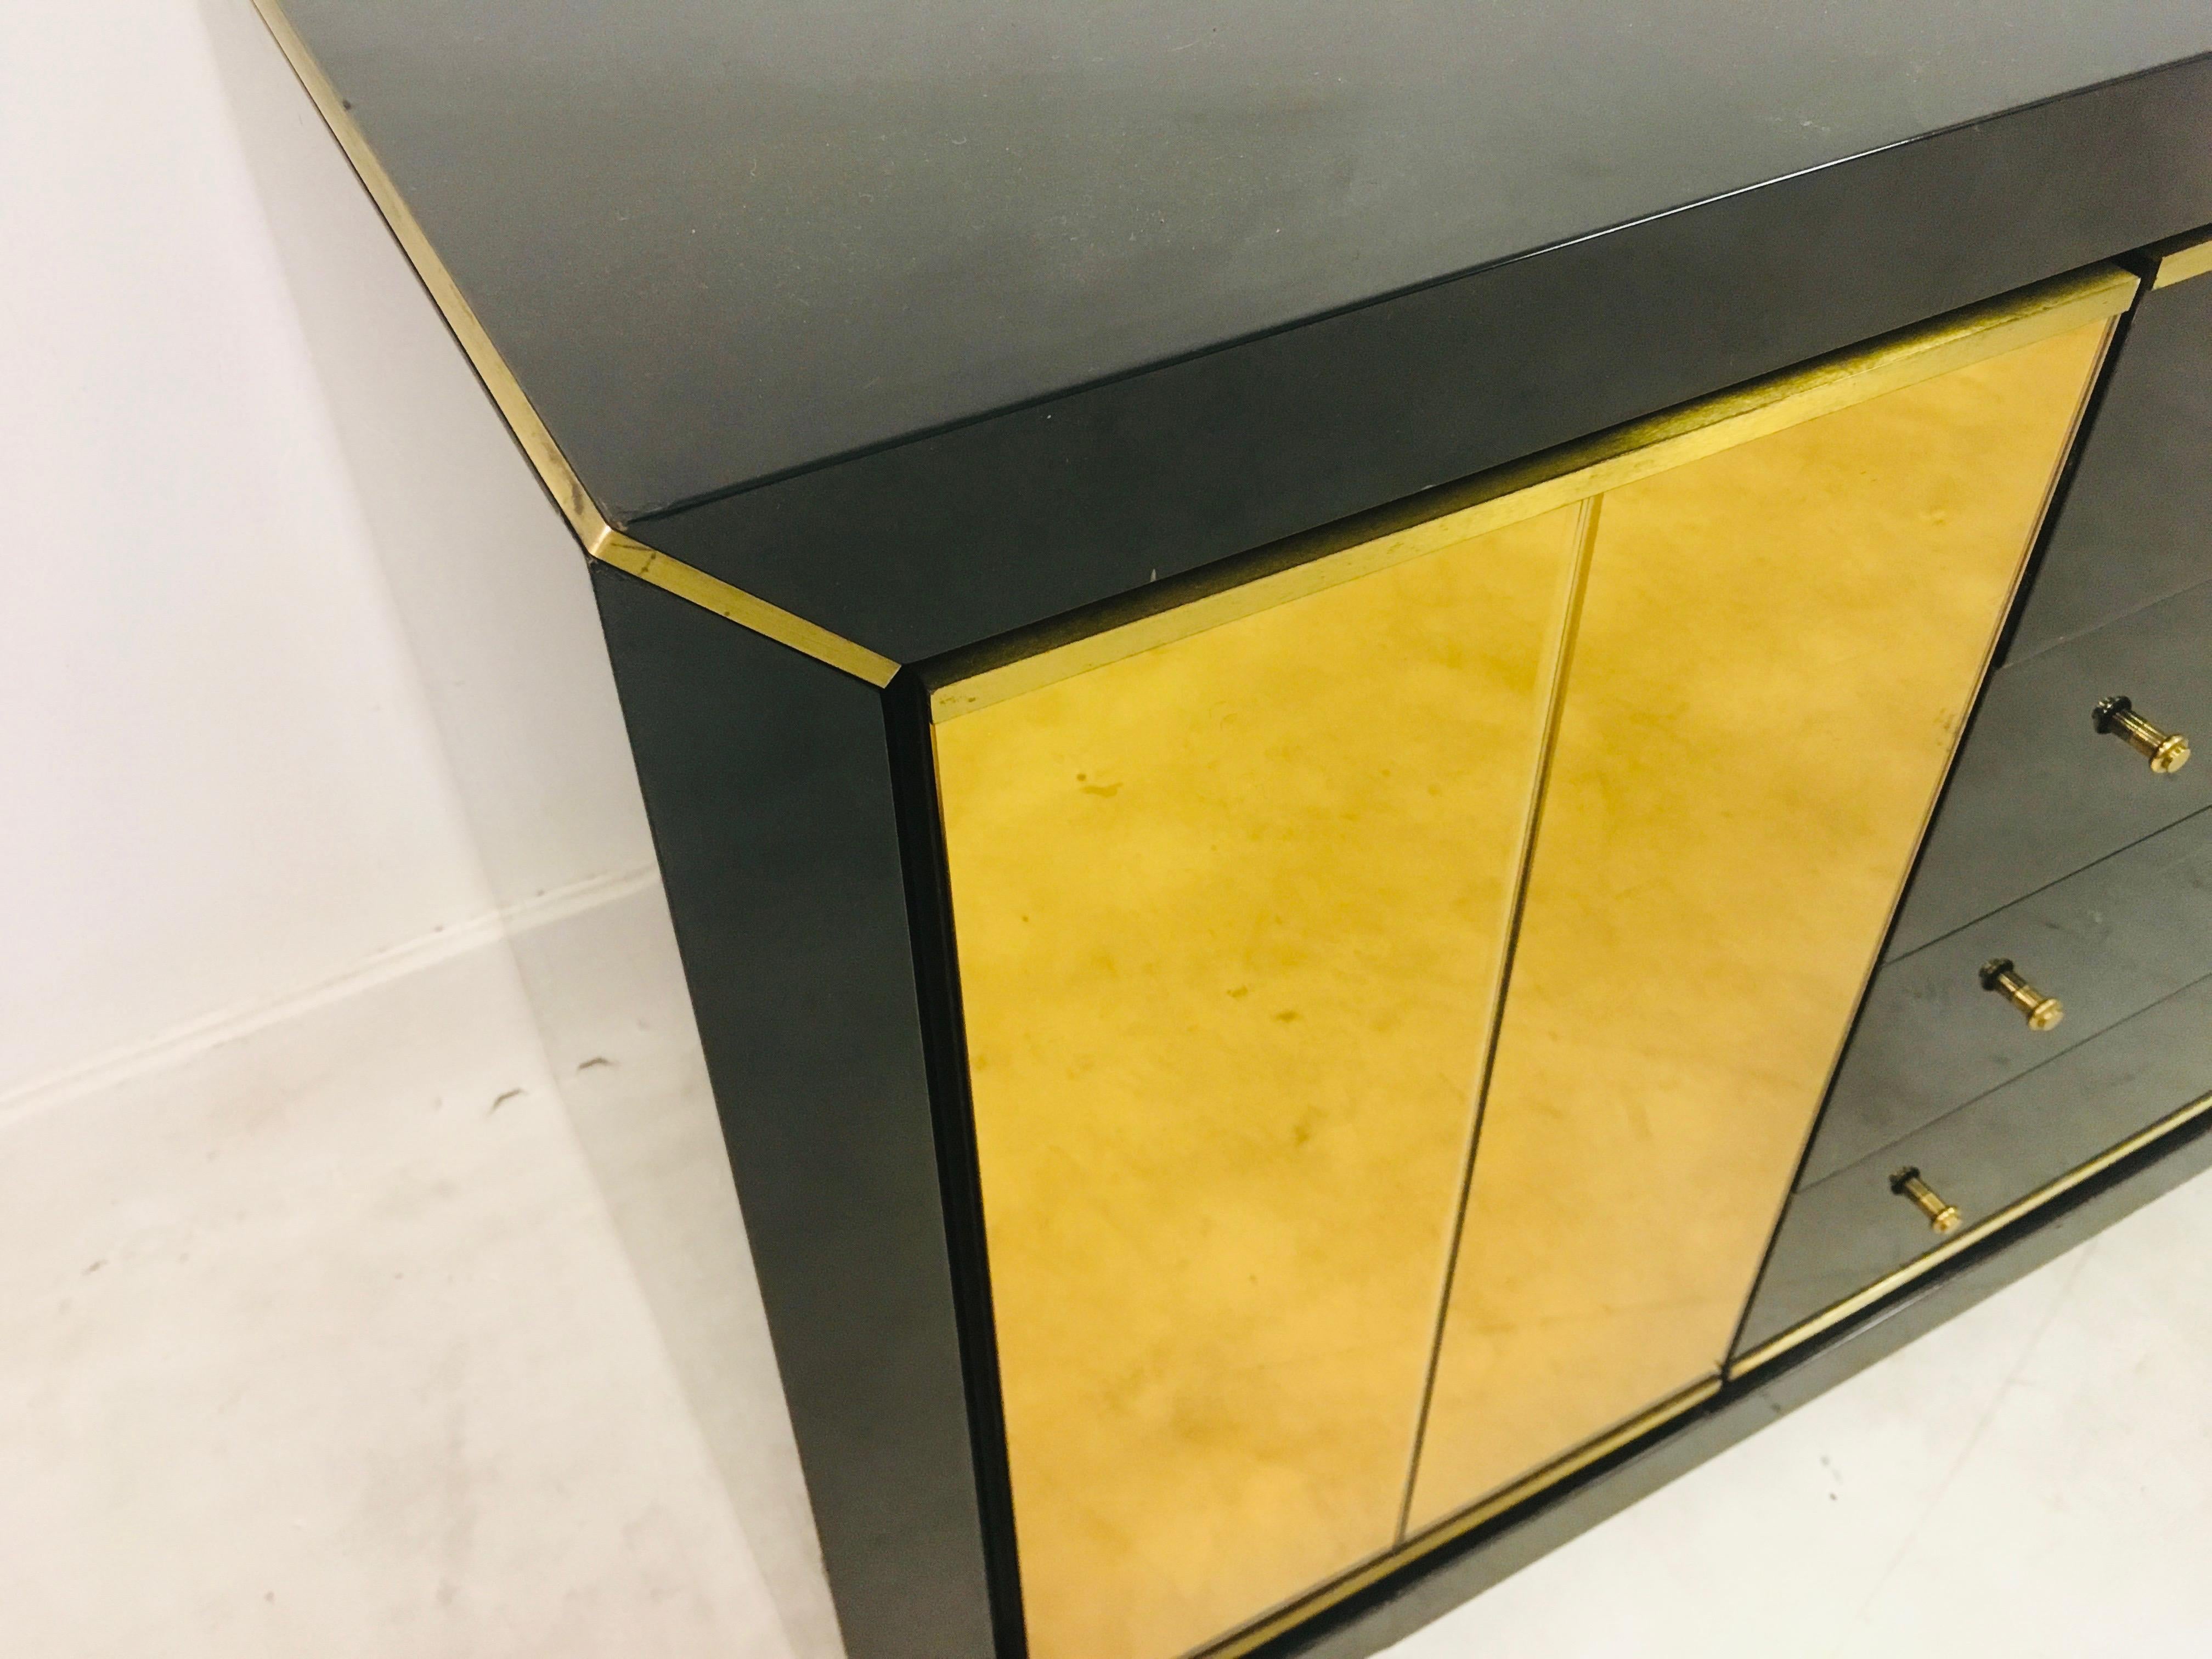 Vintage 1970s Italian Black Lacquer and Brass Sideboard (Italienisch)